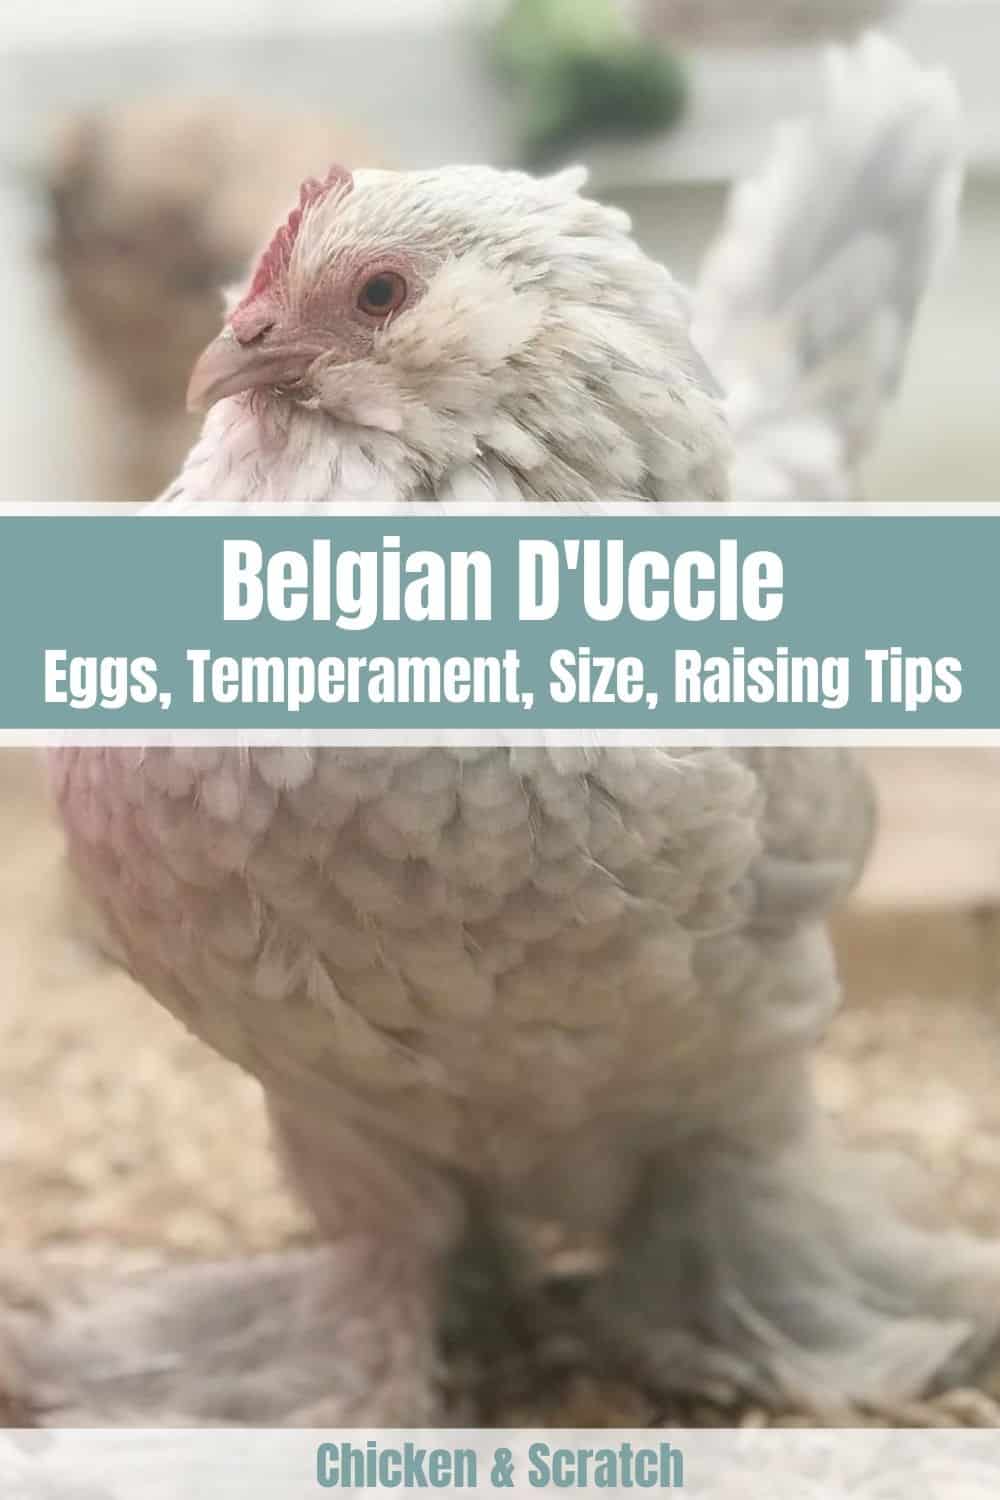 Belgian D'Uccle Eggs, Height, Size and Raising Tips